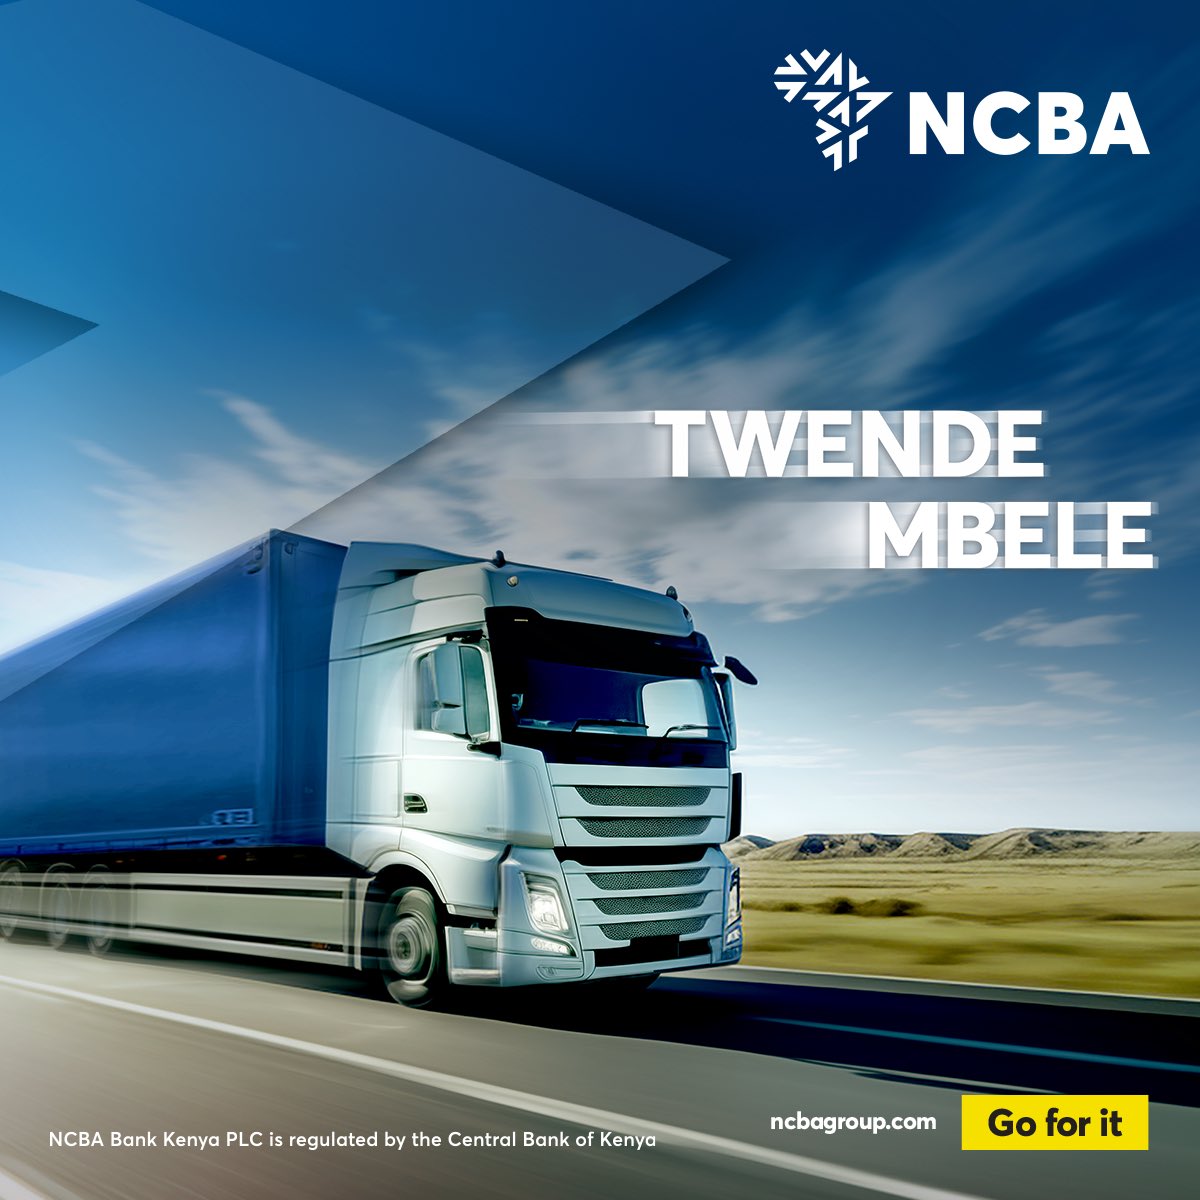 Here's to the journey and the adventures ahead! Let’s Go For It Together #NCBATwendeMbele #GoForIt @NCBABankKenya